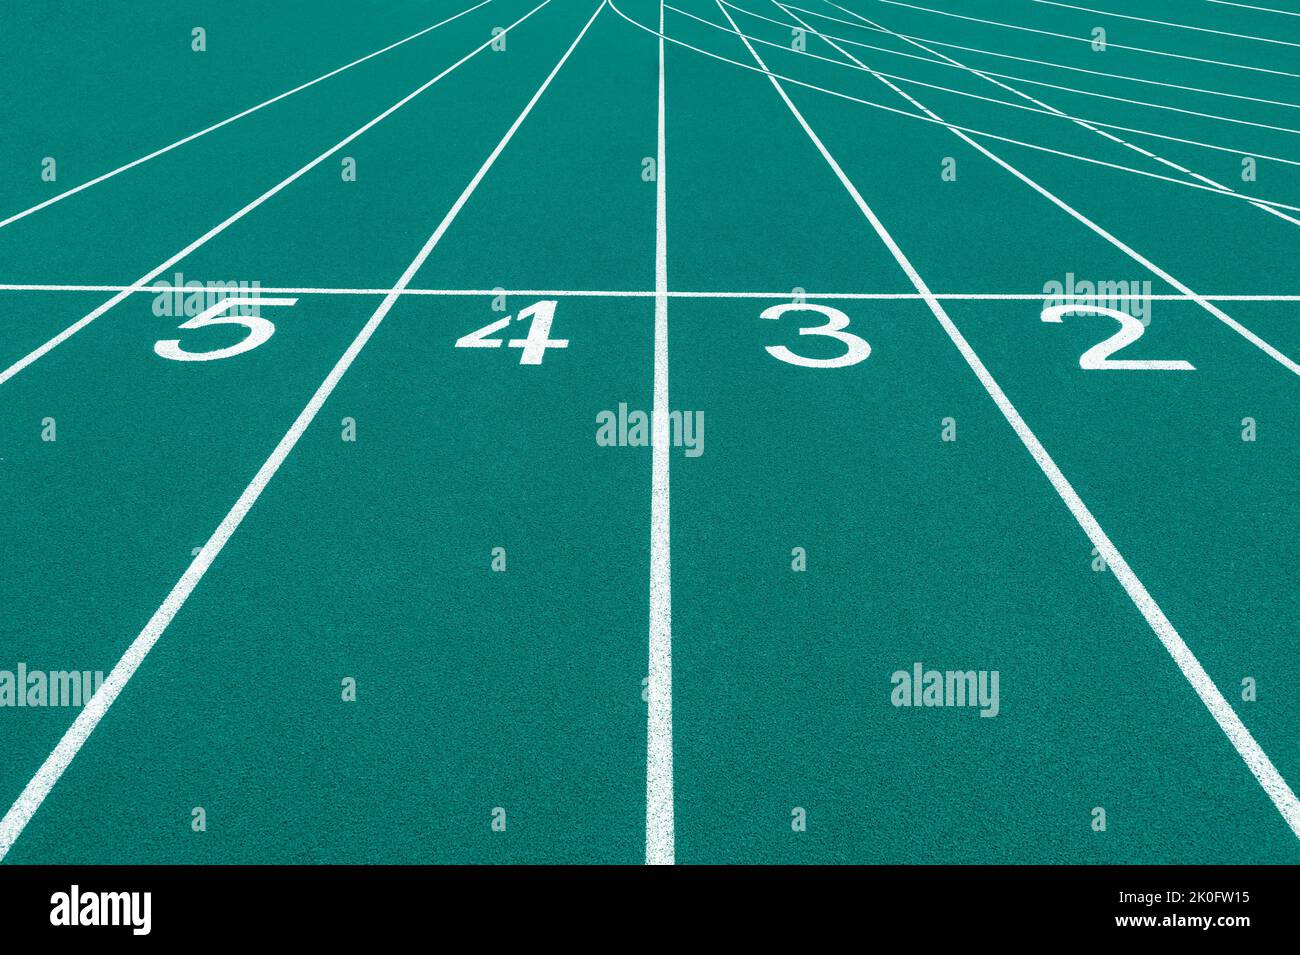 Mint color track and field lanes and numbers. Running lanes at a track and field athletic center. Horizontal sport theme poster, greeting cards, heade Stock Photo